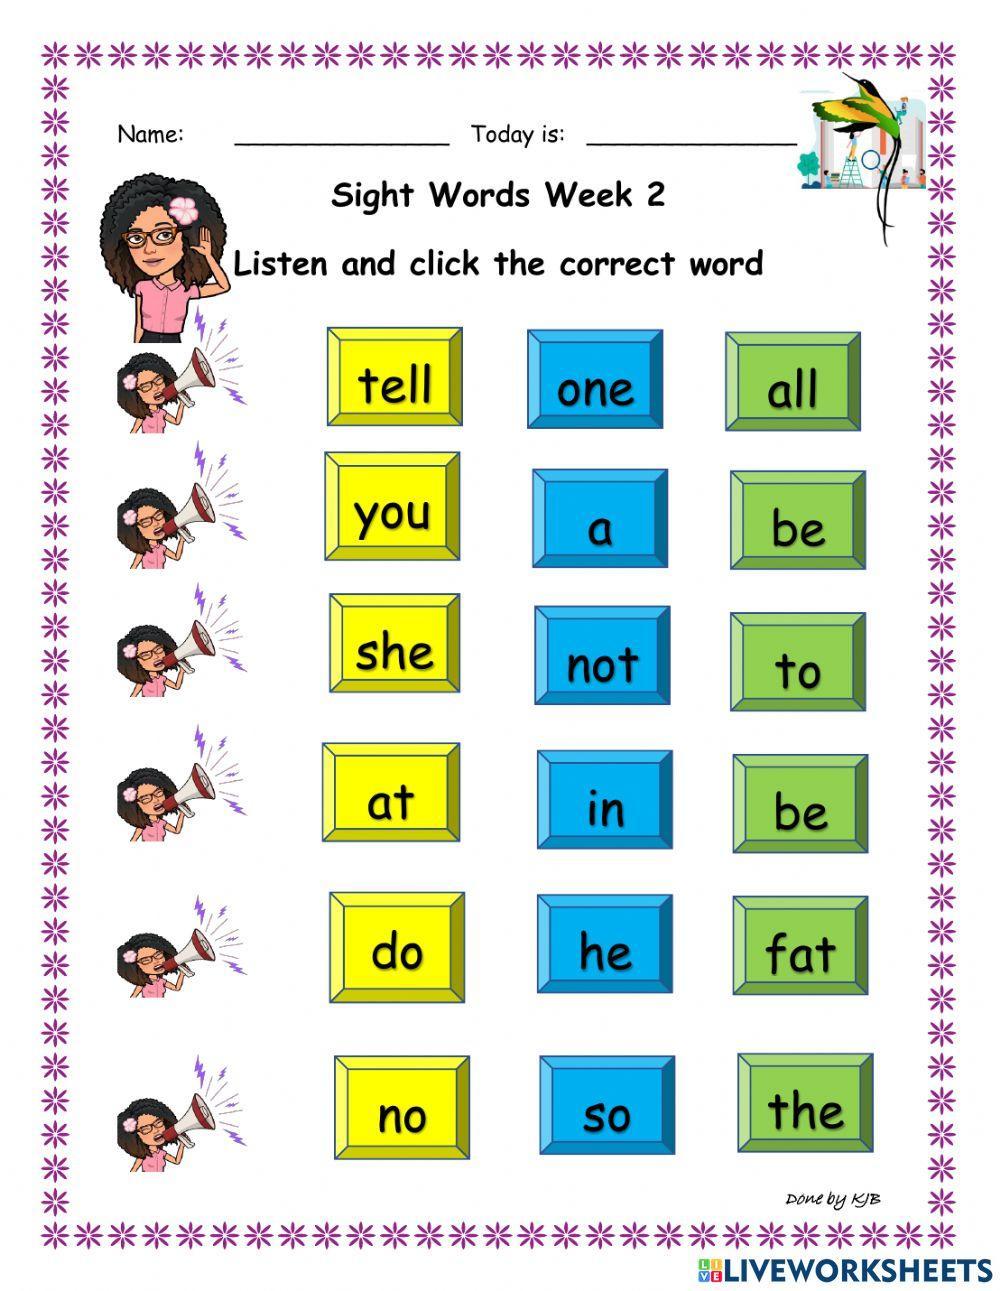 Listen and Identify Sight words week 2